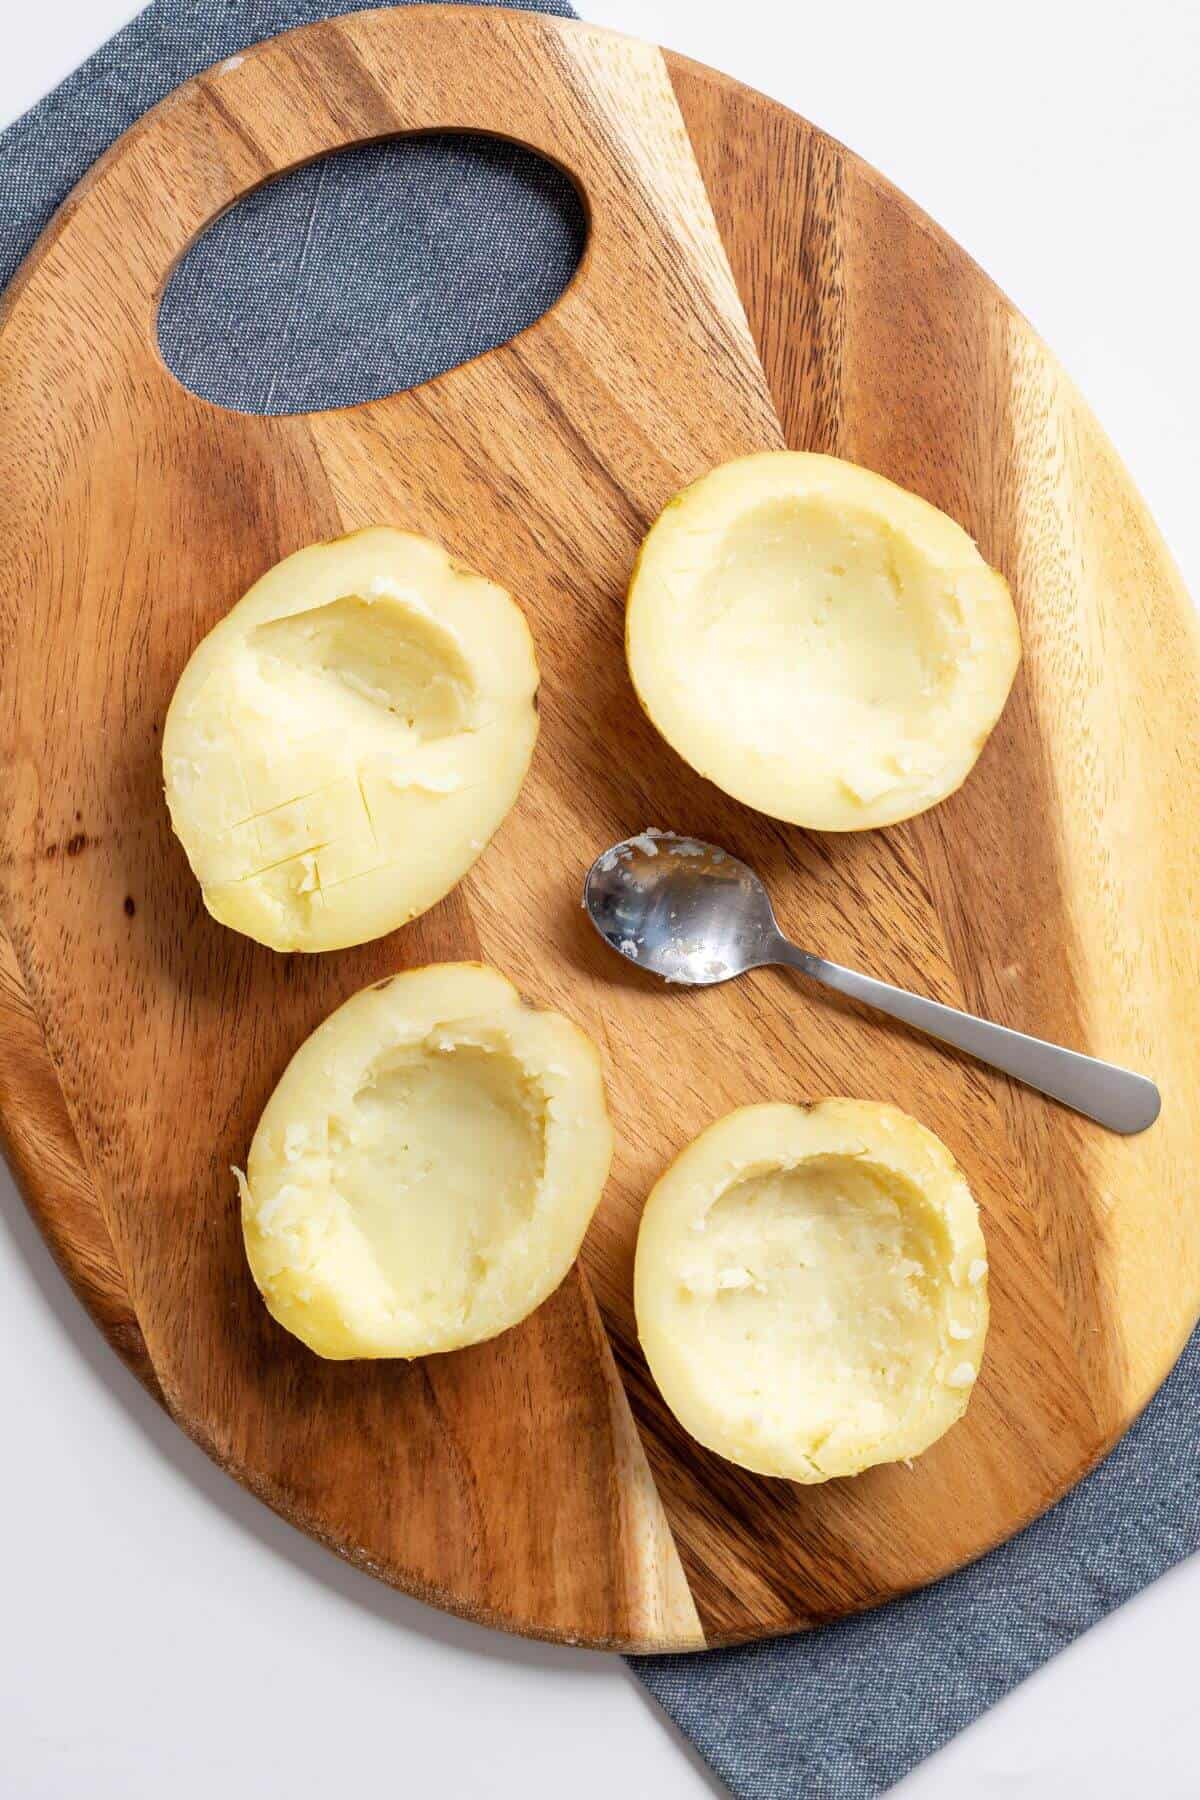 Potatoes with inside scooped out.